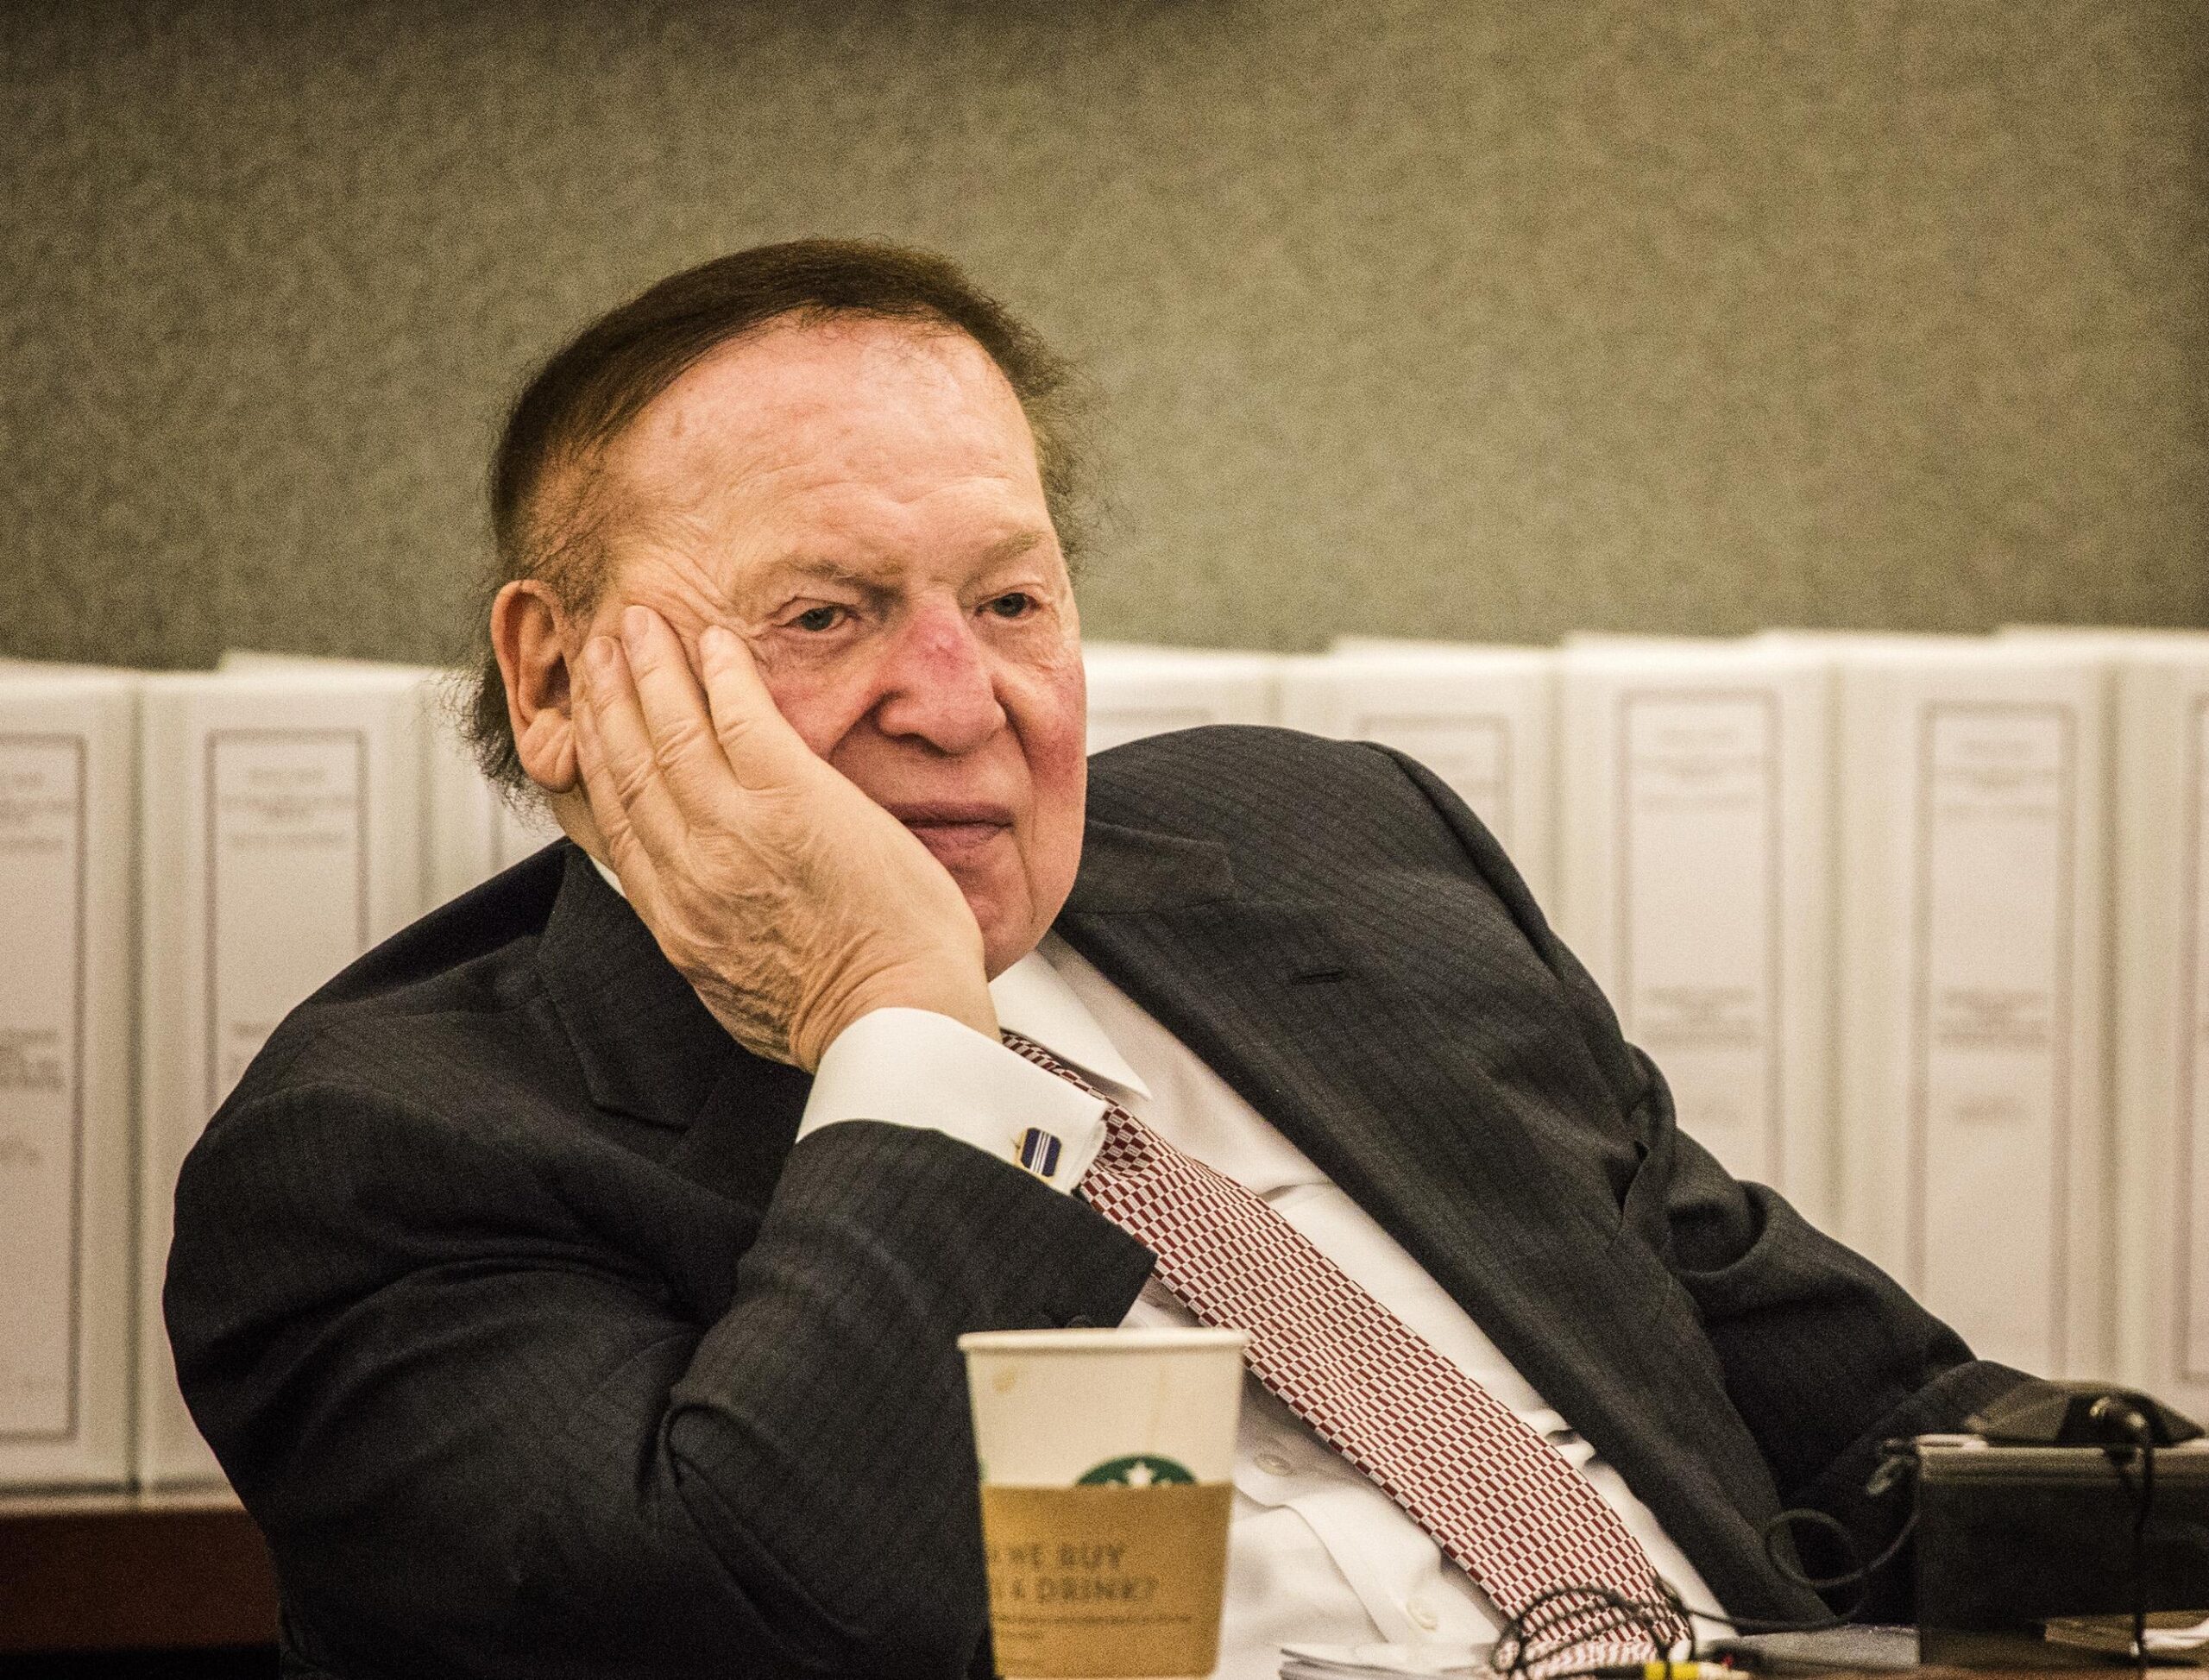 Sheldon Adelson to Battle Macau Wrongful Termination Suit in Nevada Court, Triad Connections Alleged